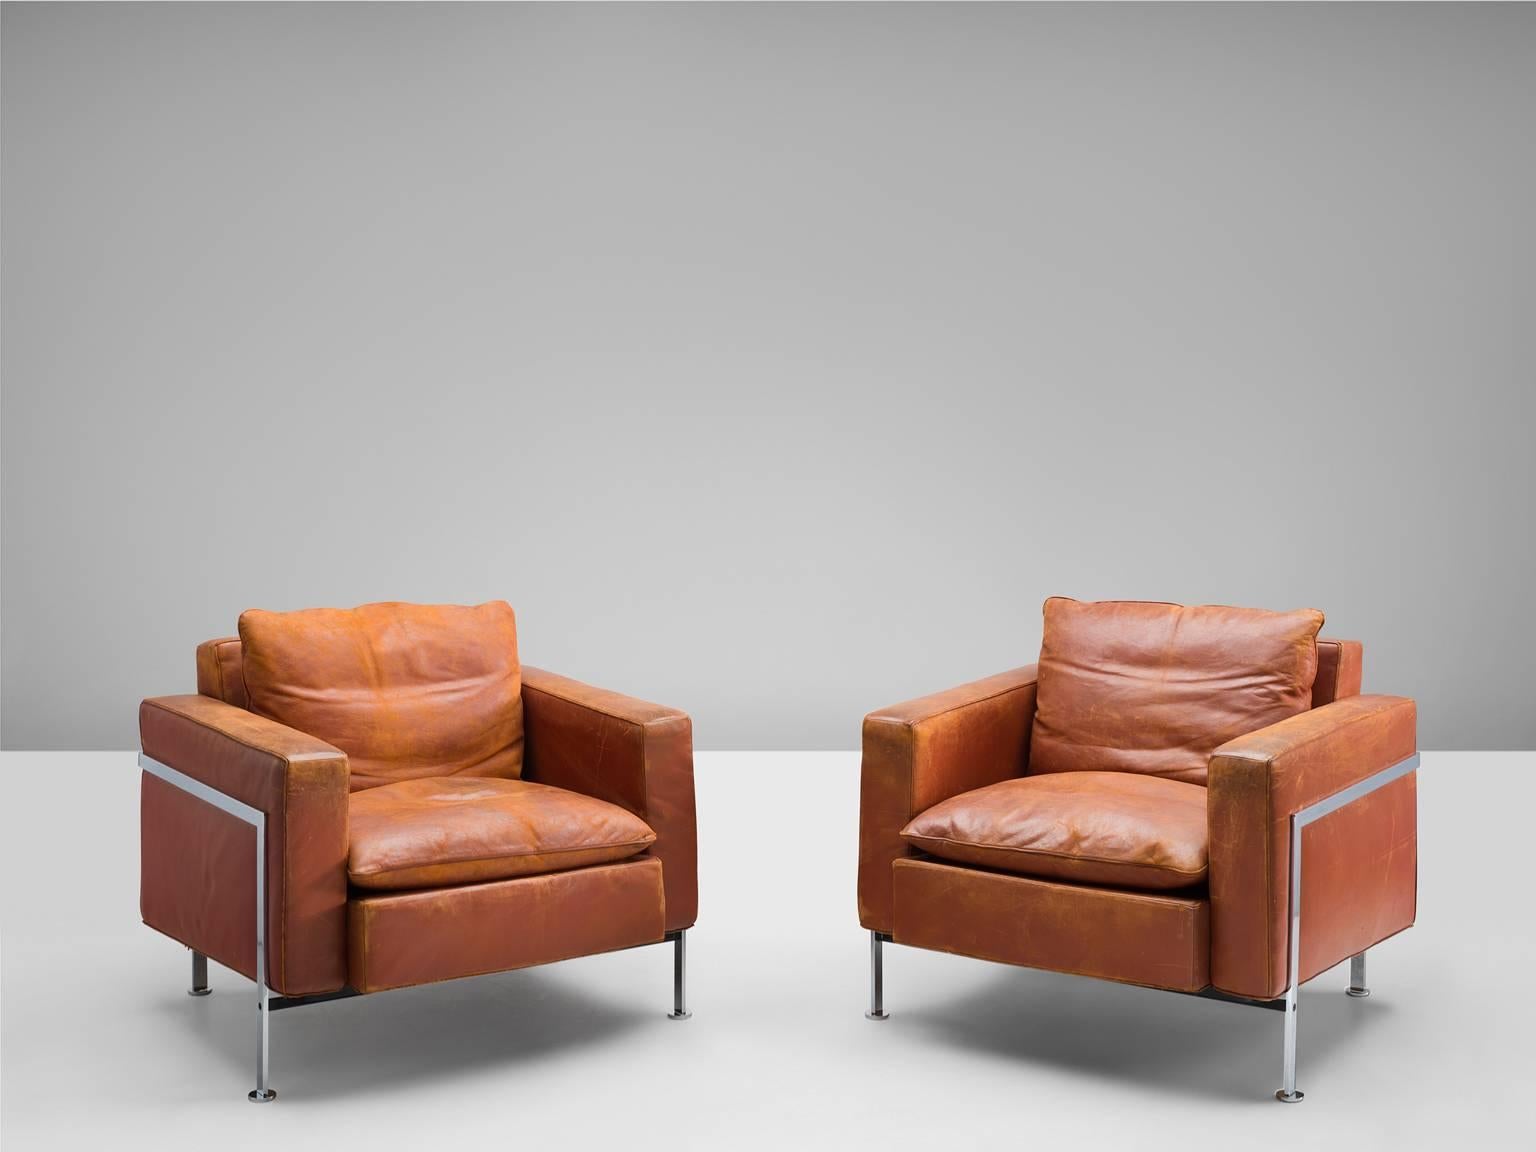 Pair of cognac leather armchairs by Robert Hausmann, for DeSede, Switzerland,  1954.

This rare model shows the extreme high quality this exclusive brand is famous for. These lounge chairs have absolute great comfort, due to the well designed